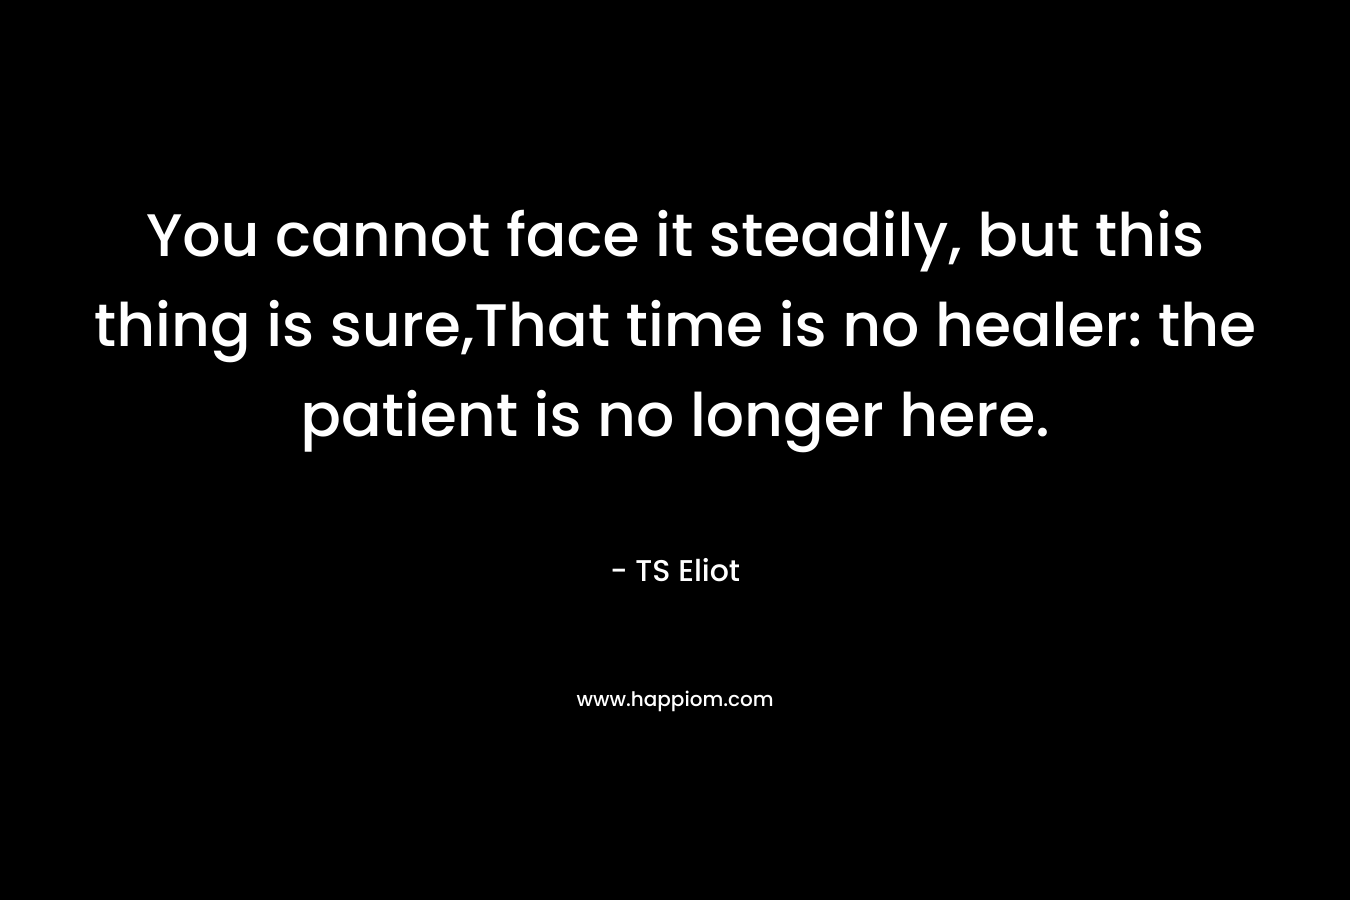 You cannot face it steadily, but this thing is sure,That time is no healer: the patient is no longer here.